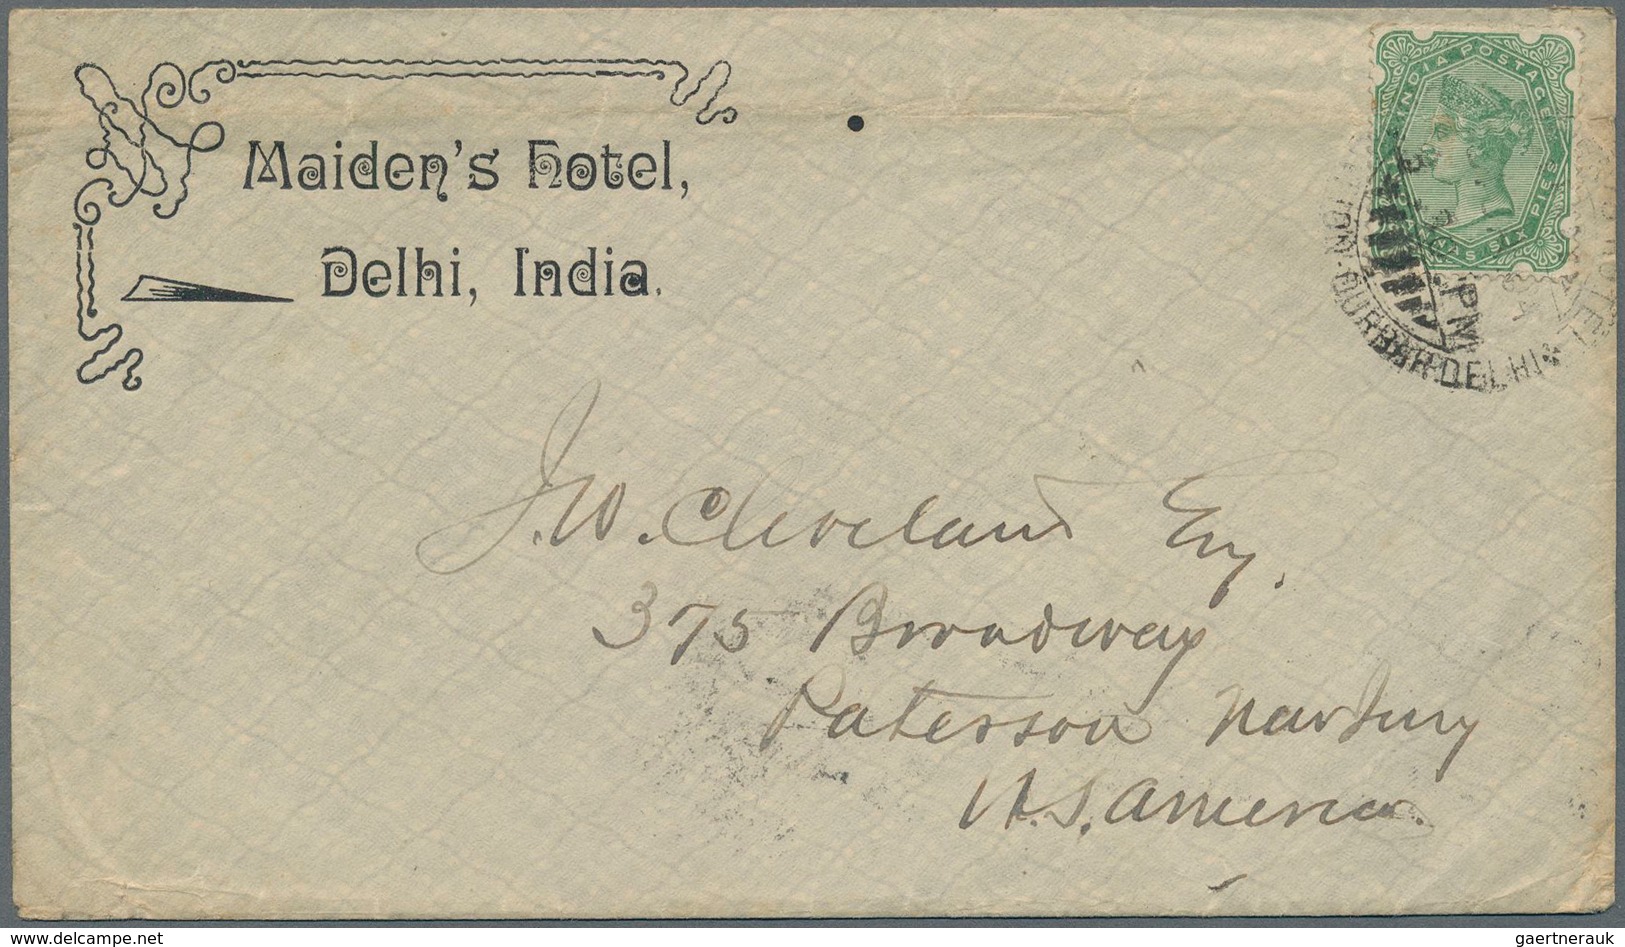 Indien: 1904-53 HOTELs: Five Illustrated Covers And A 1928 Invoice From Various Hotels, With 1904 Ma - 1852 Provincia Di Sind